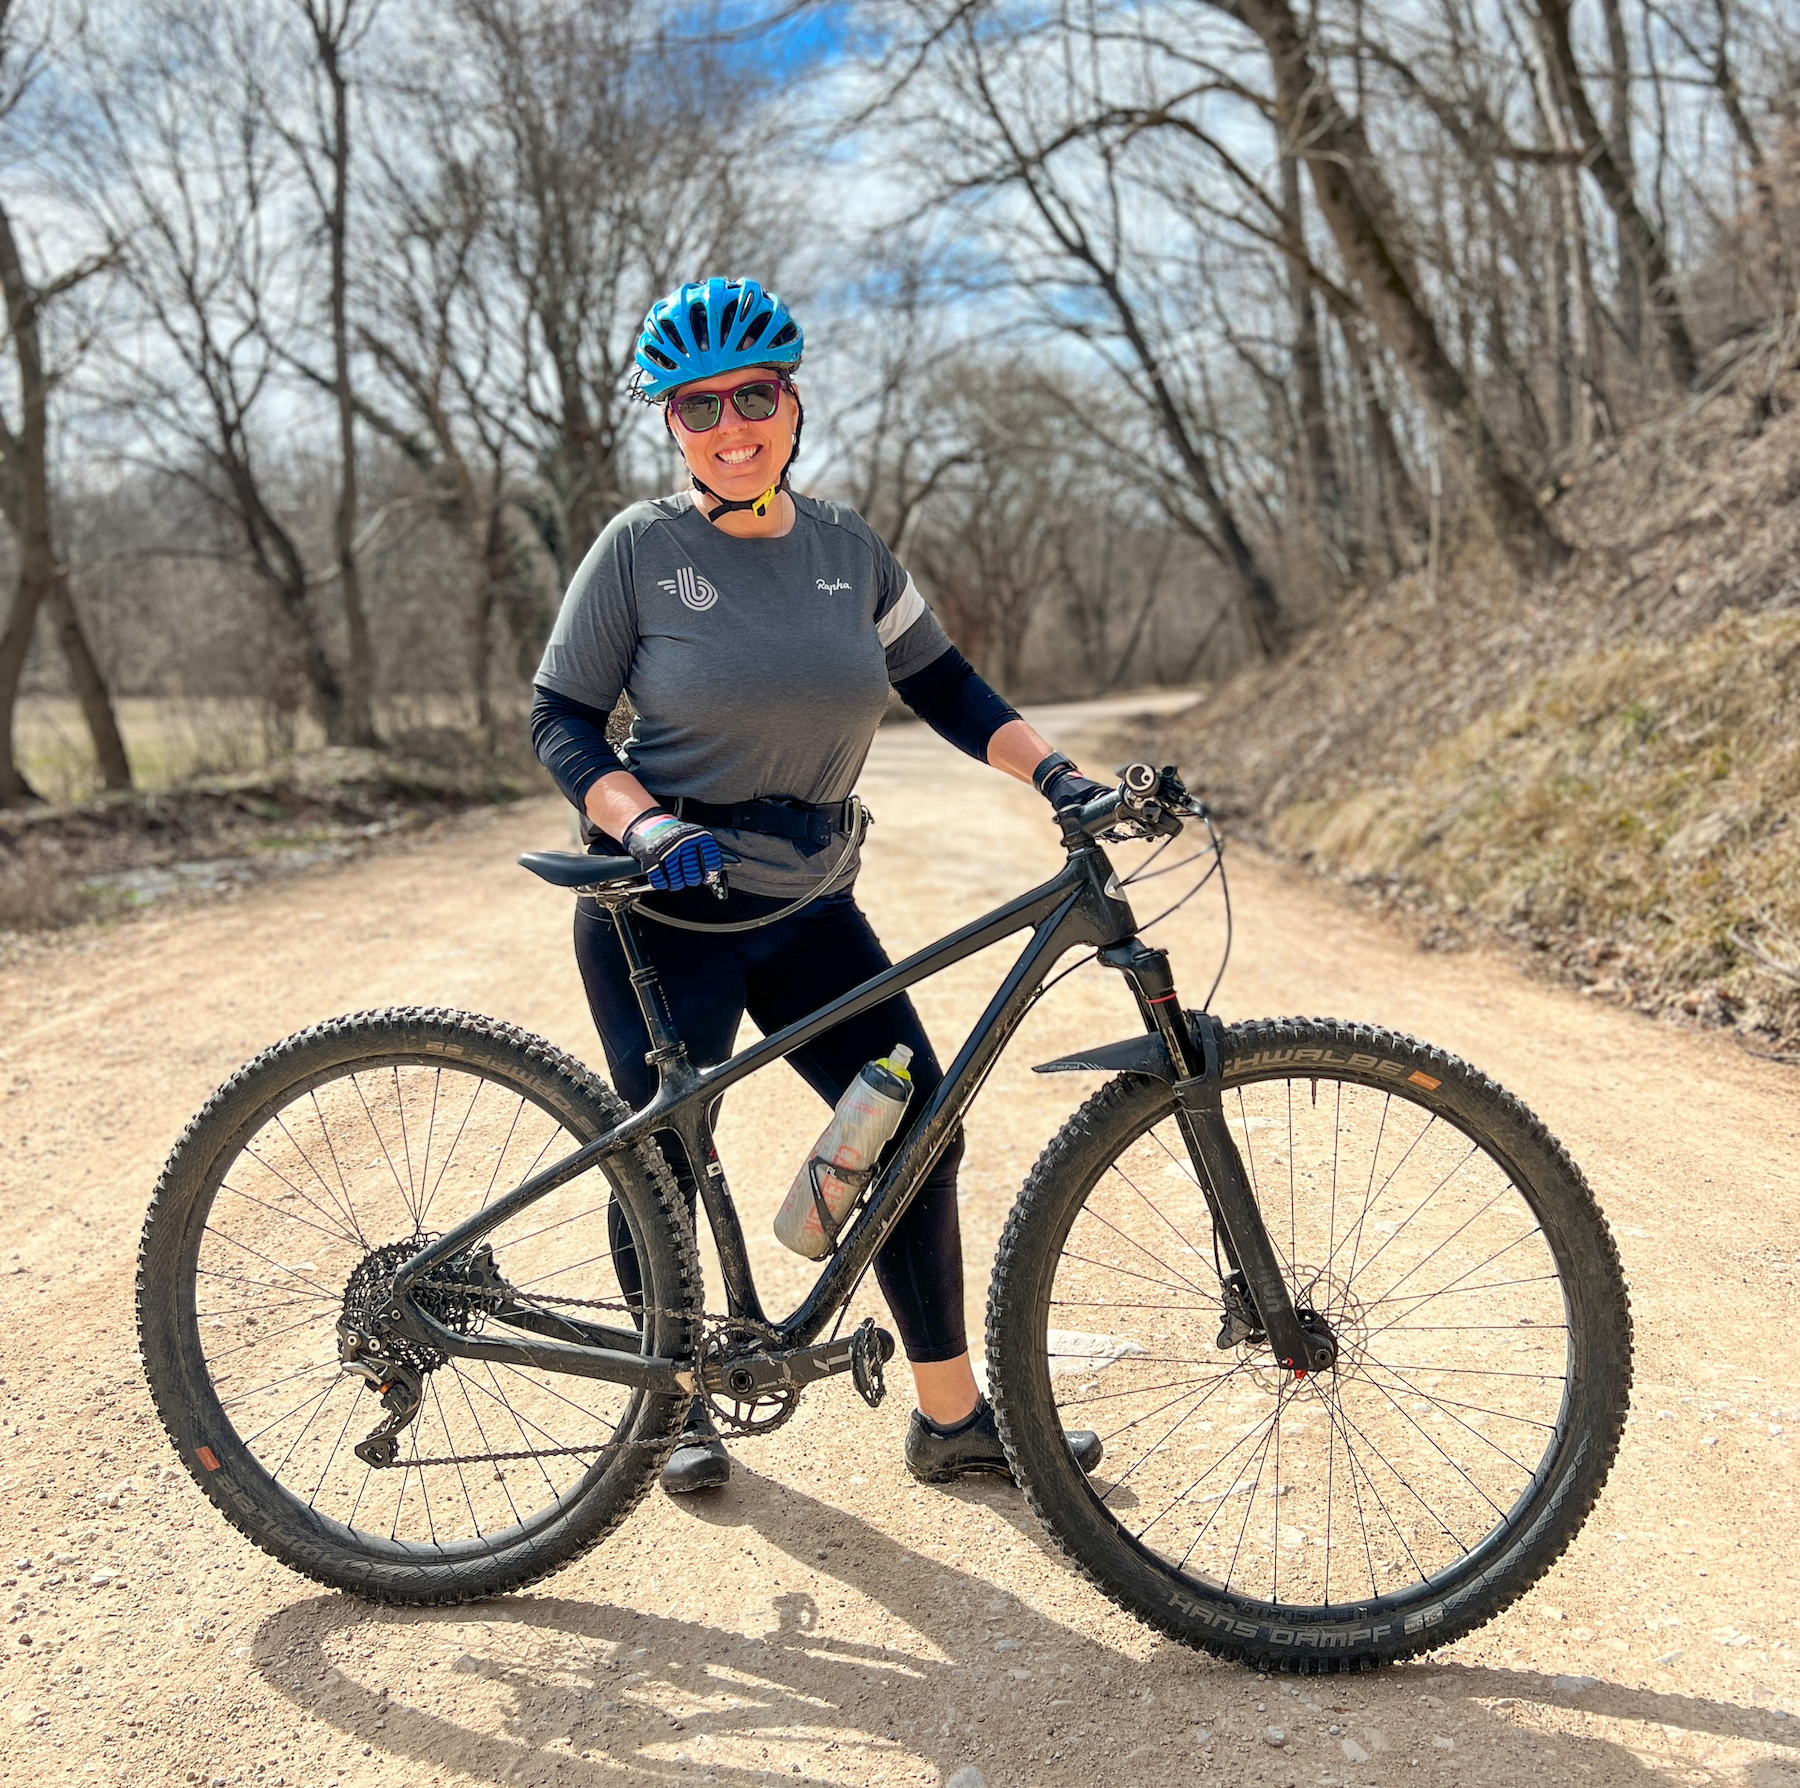 A female rider poses with her mountain bike on a gravel road.